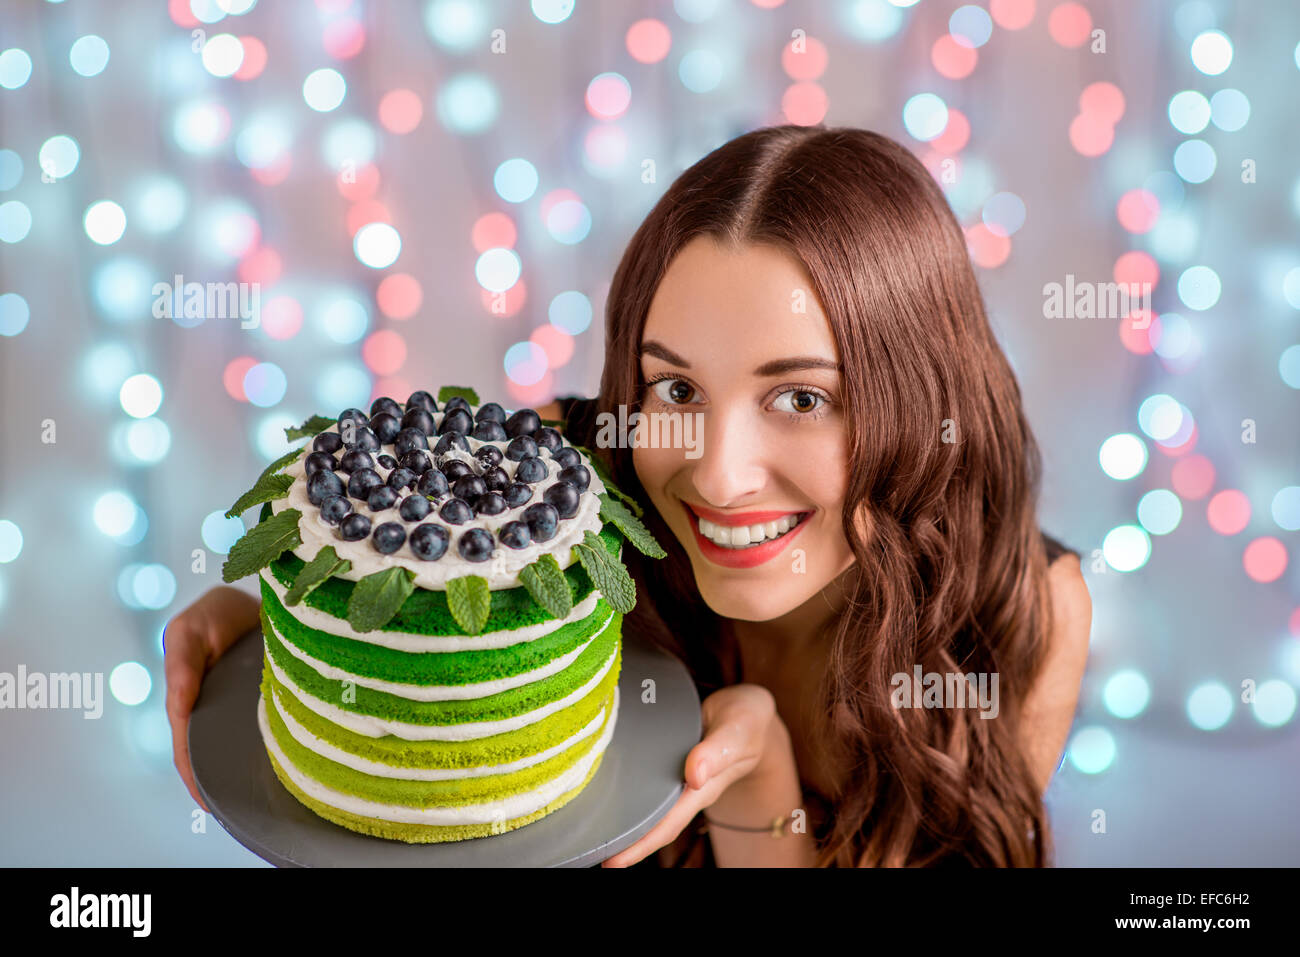 Beautiful girl holding happy birthday cake and smiling looking at ...